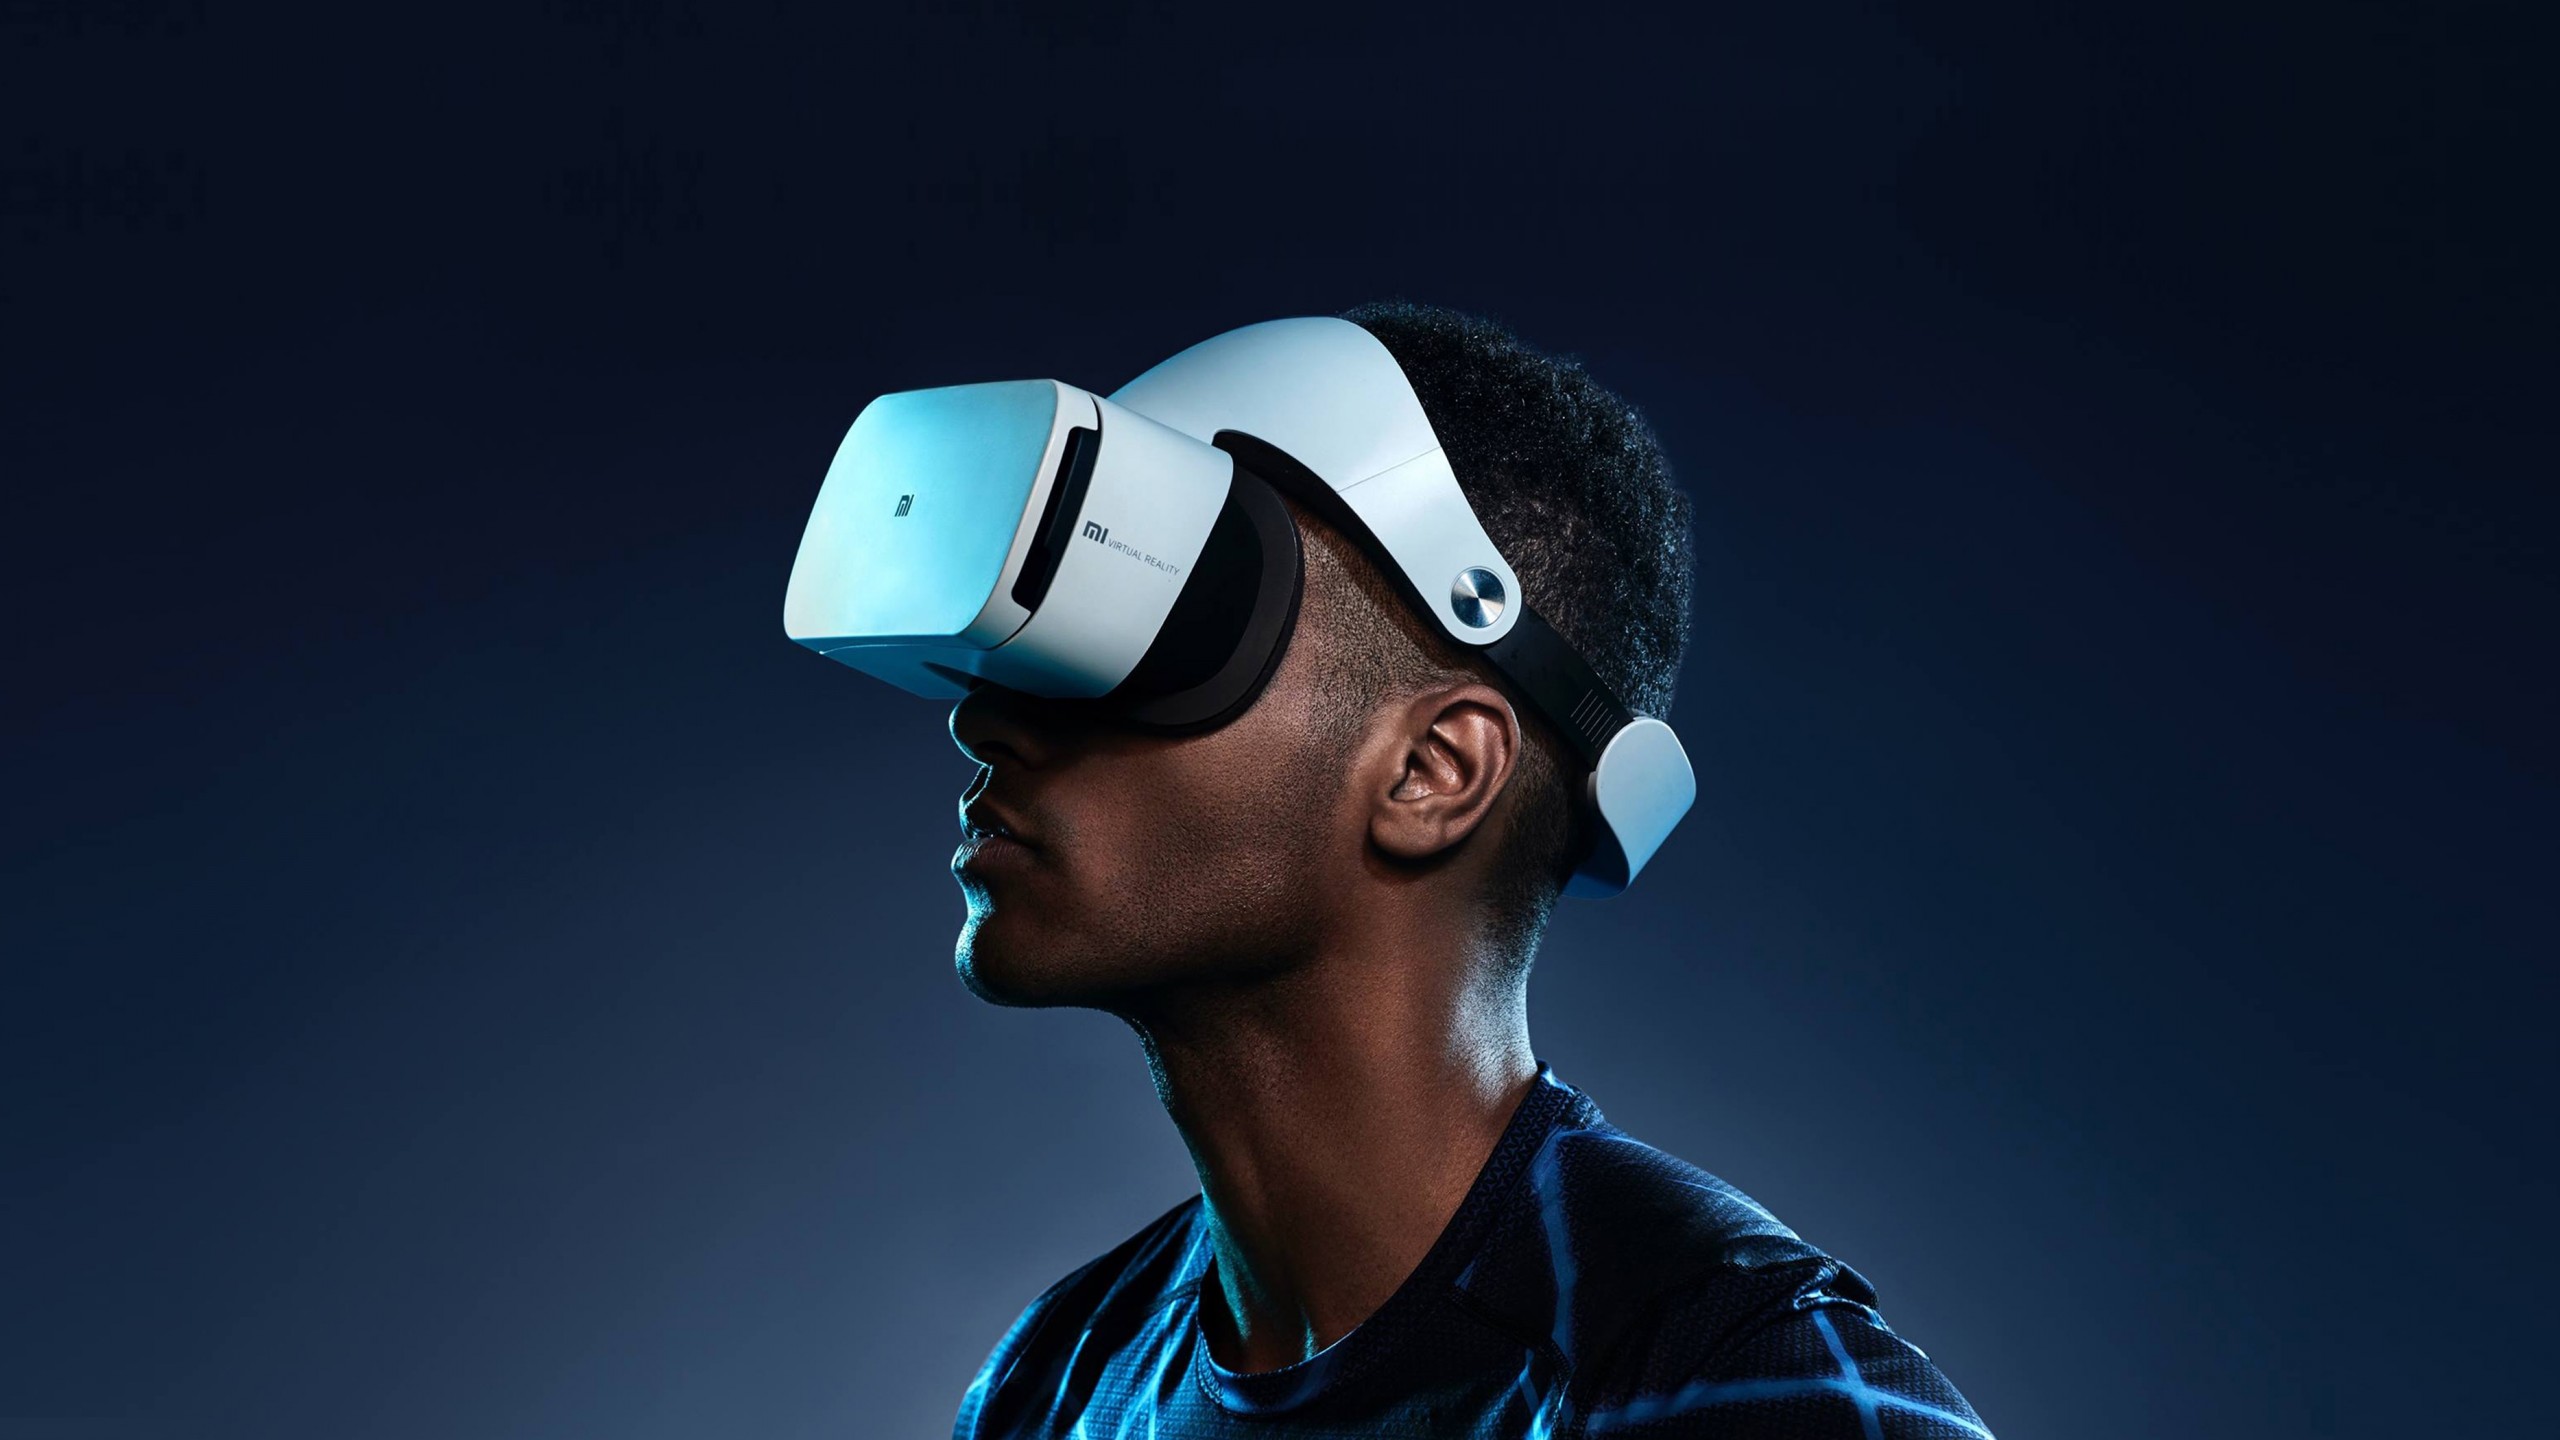 A Man using Technology Services by wearing Virtual Game Head-Set